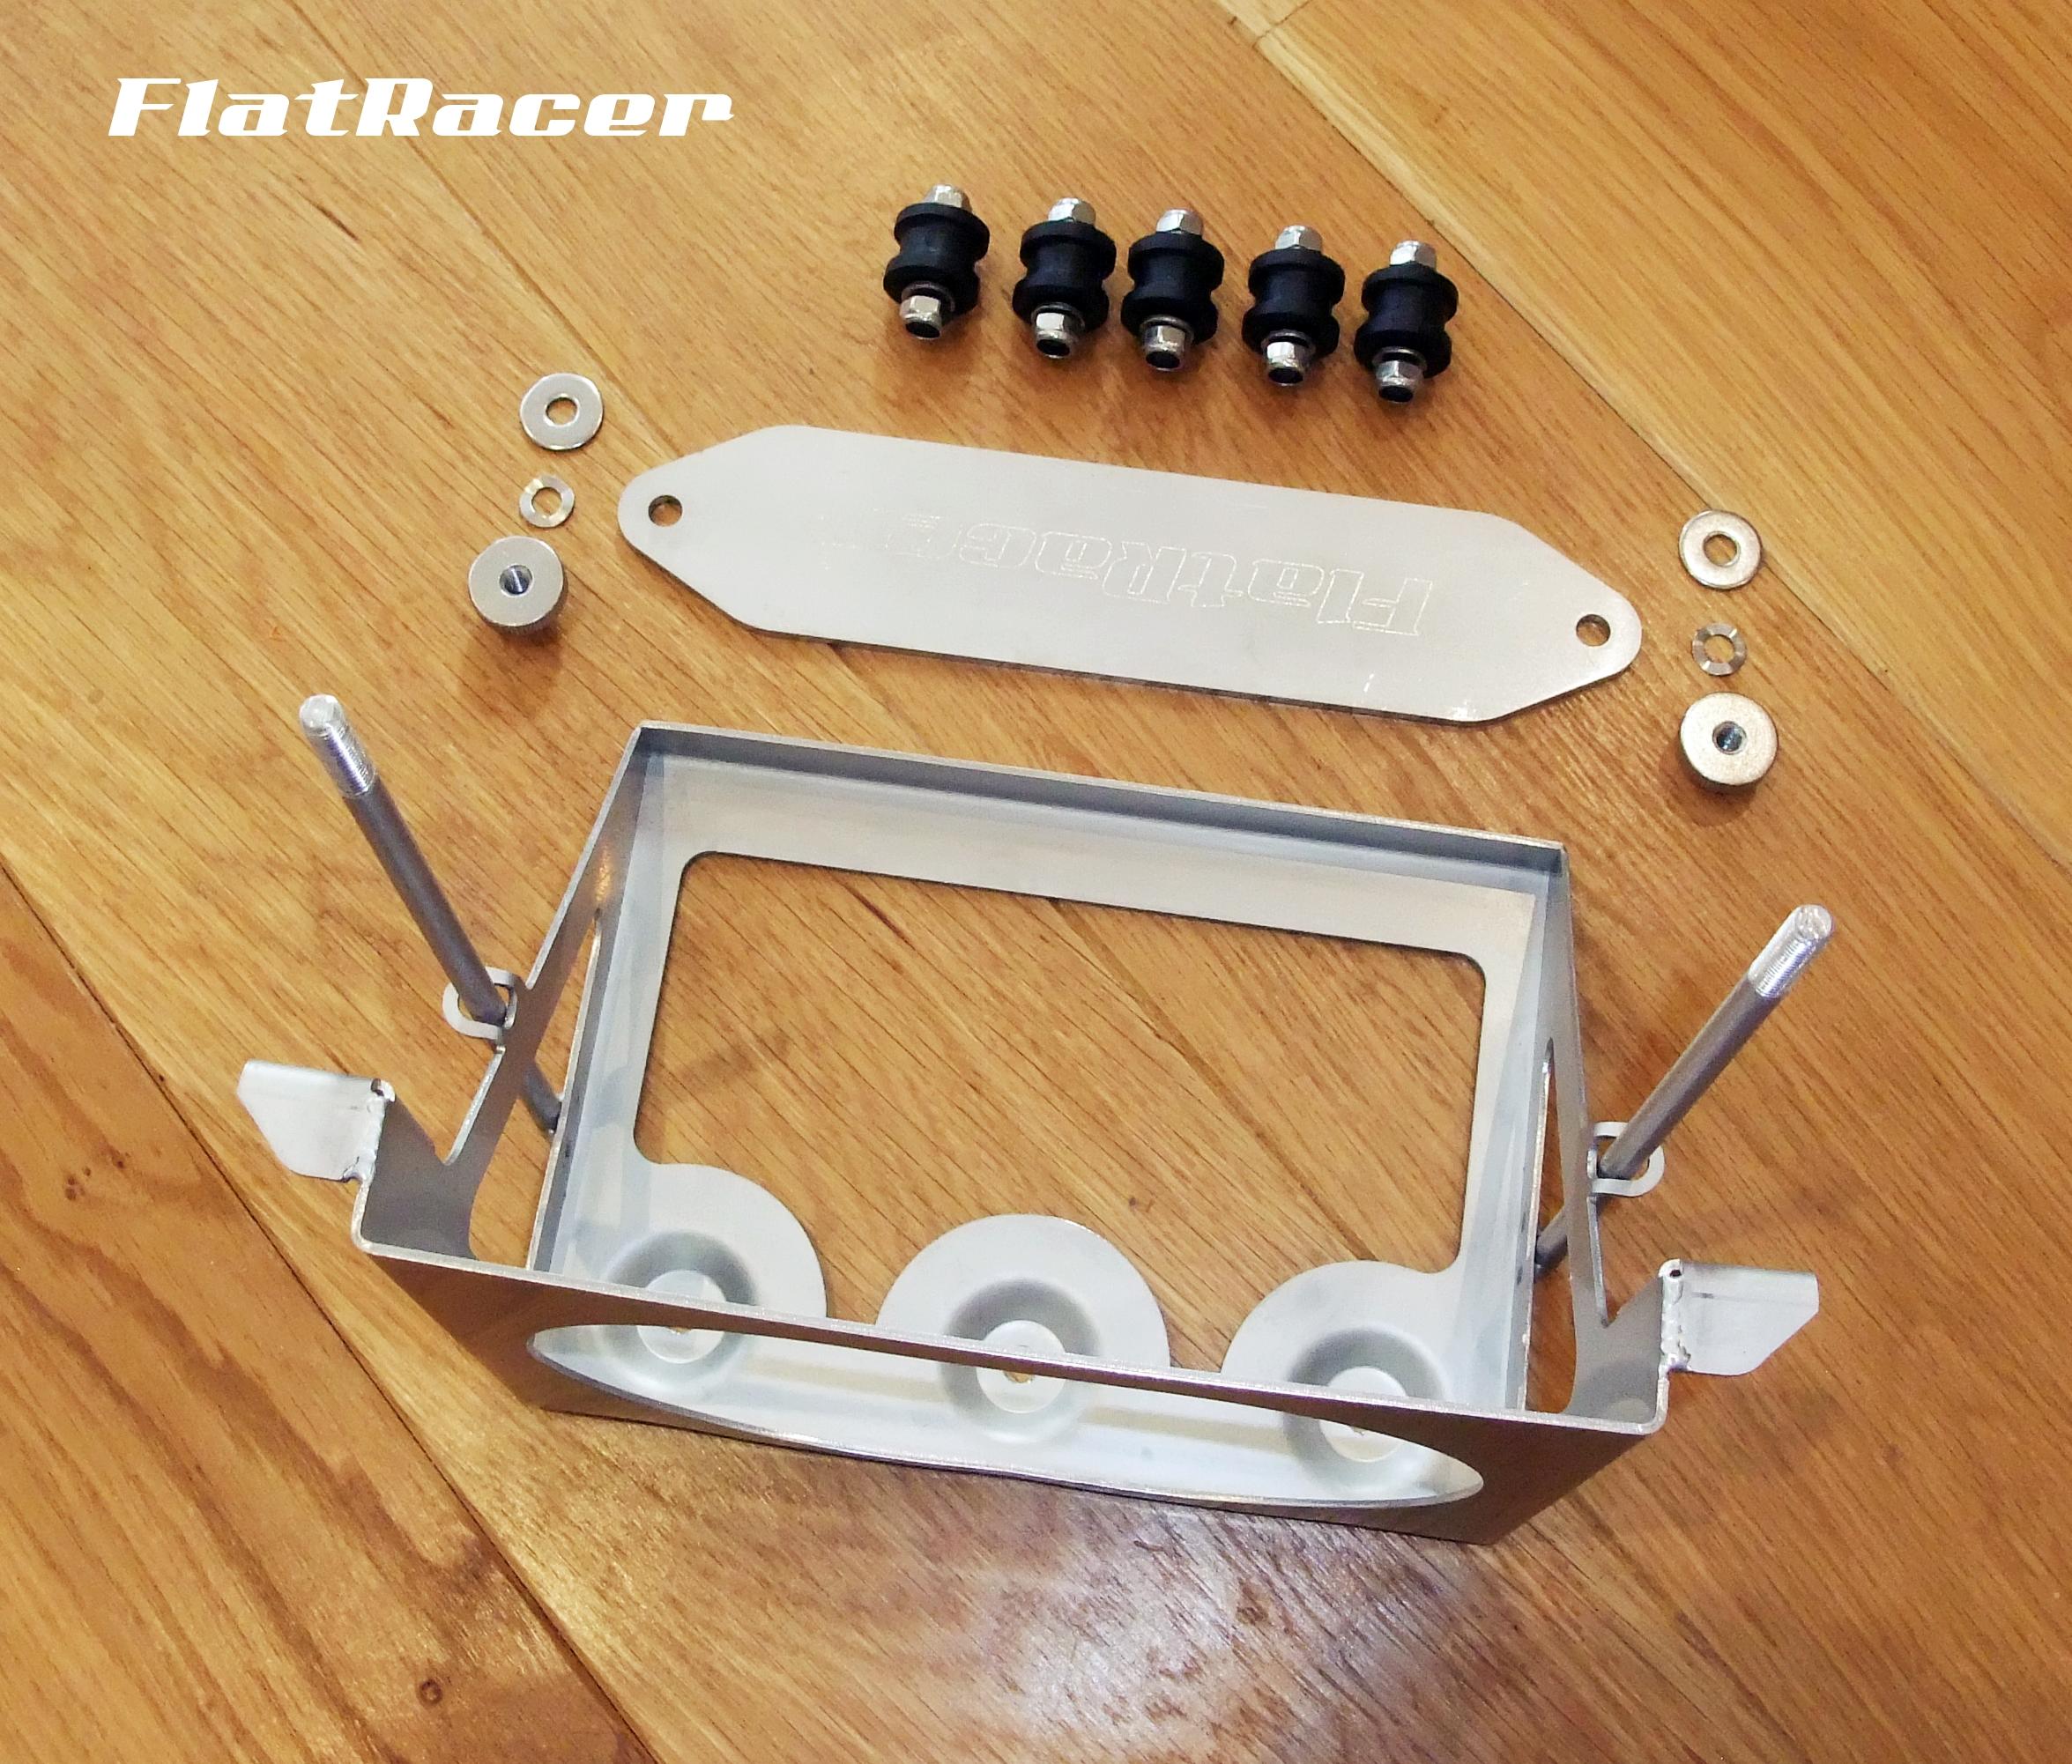 FlatRacer BMW /6 & /7 Series (73-84) standard stainless steel battery tray - with 5 x M6 rubber bobbins